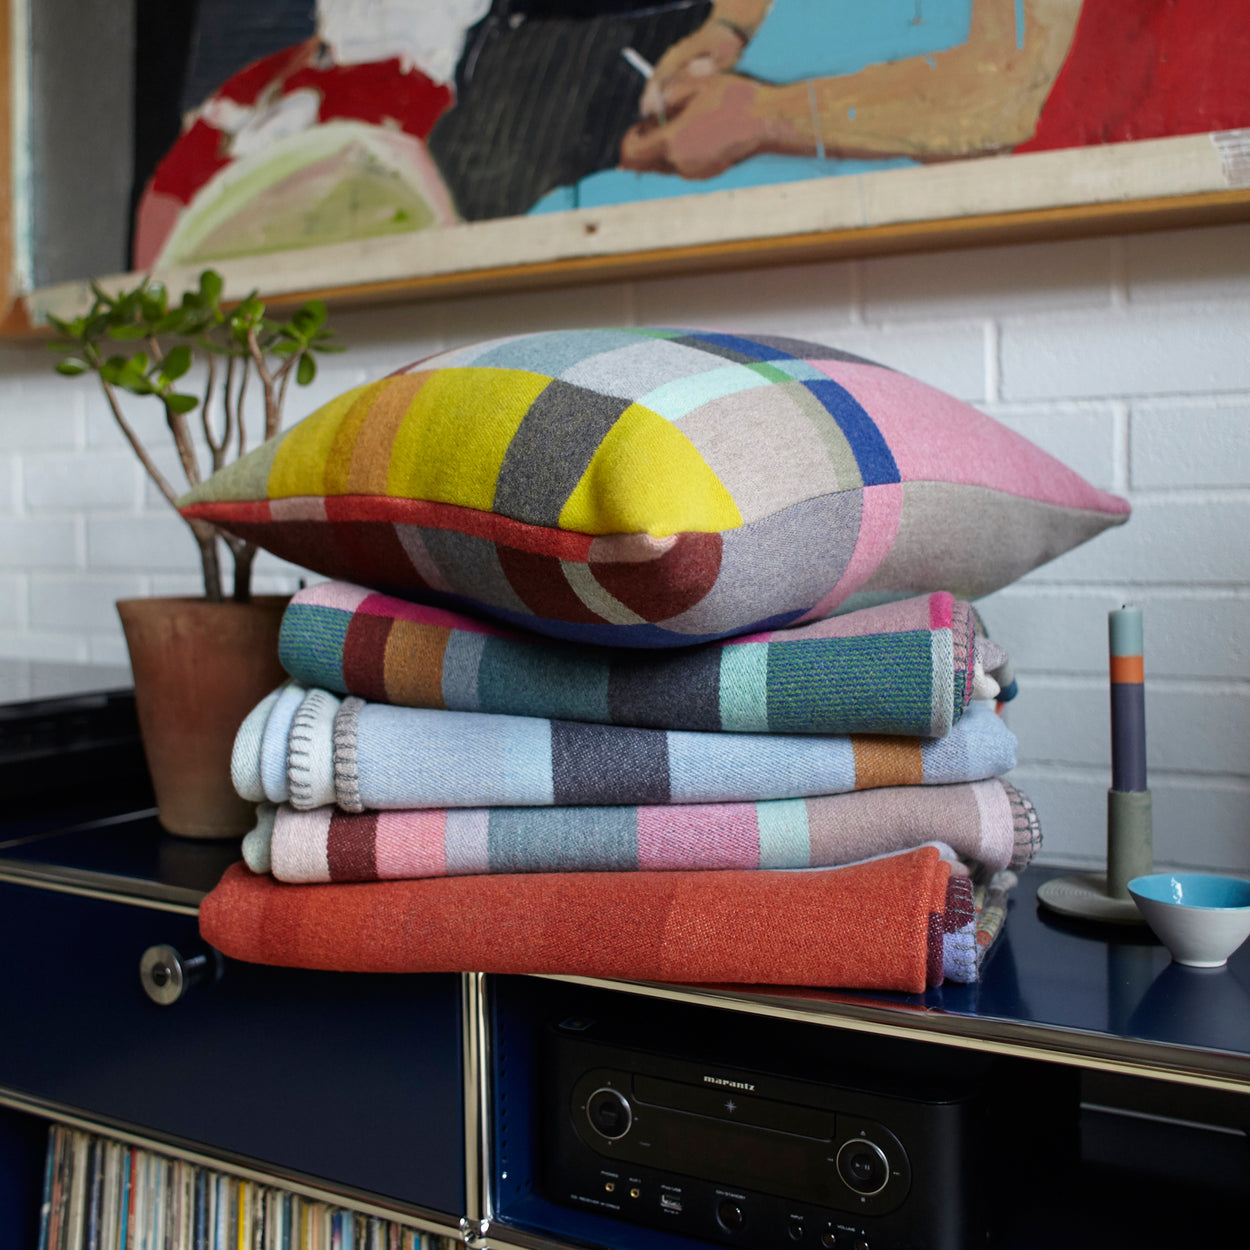 Premium Merino wool cushion cover in Lloyd with blankets on buffet top.